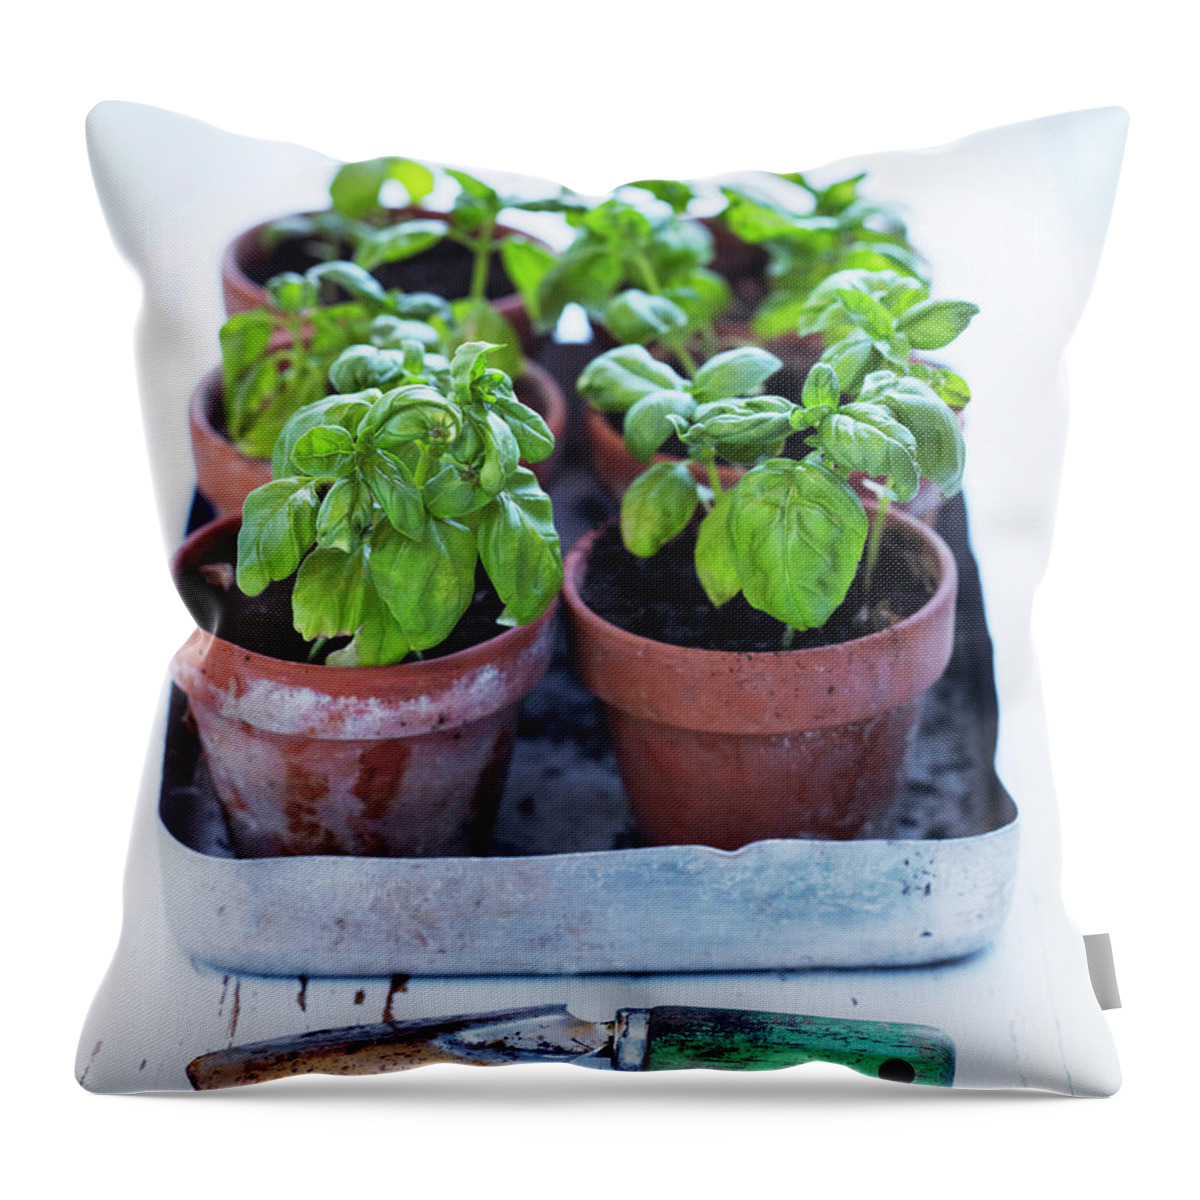 In A Row Throw Pillow featuring the photograph Basil Plant Seedlings by Johner Images